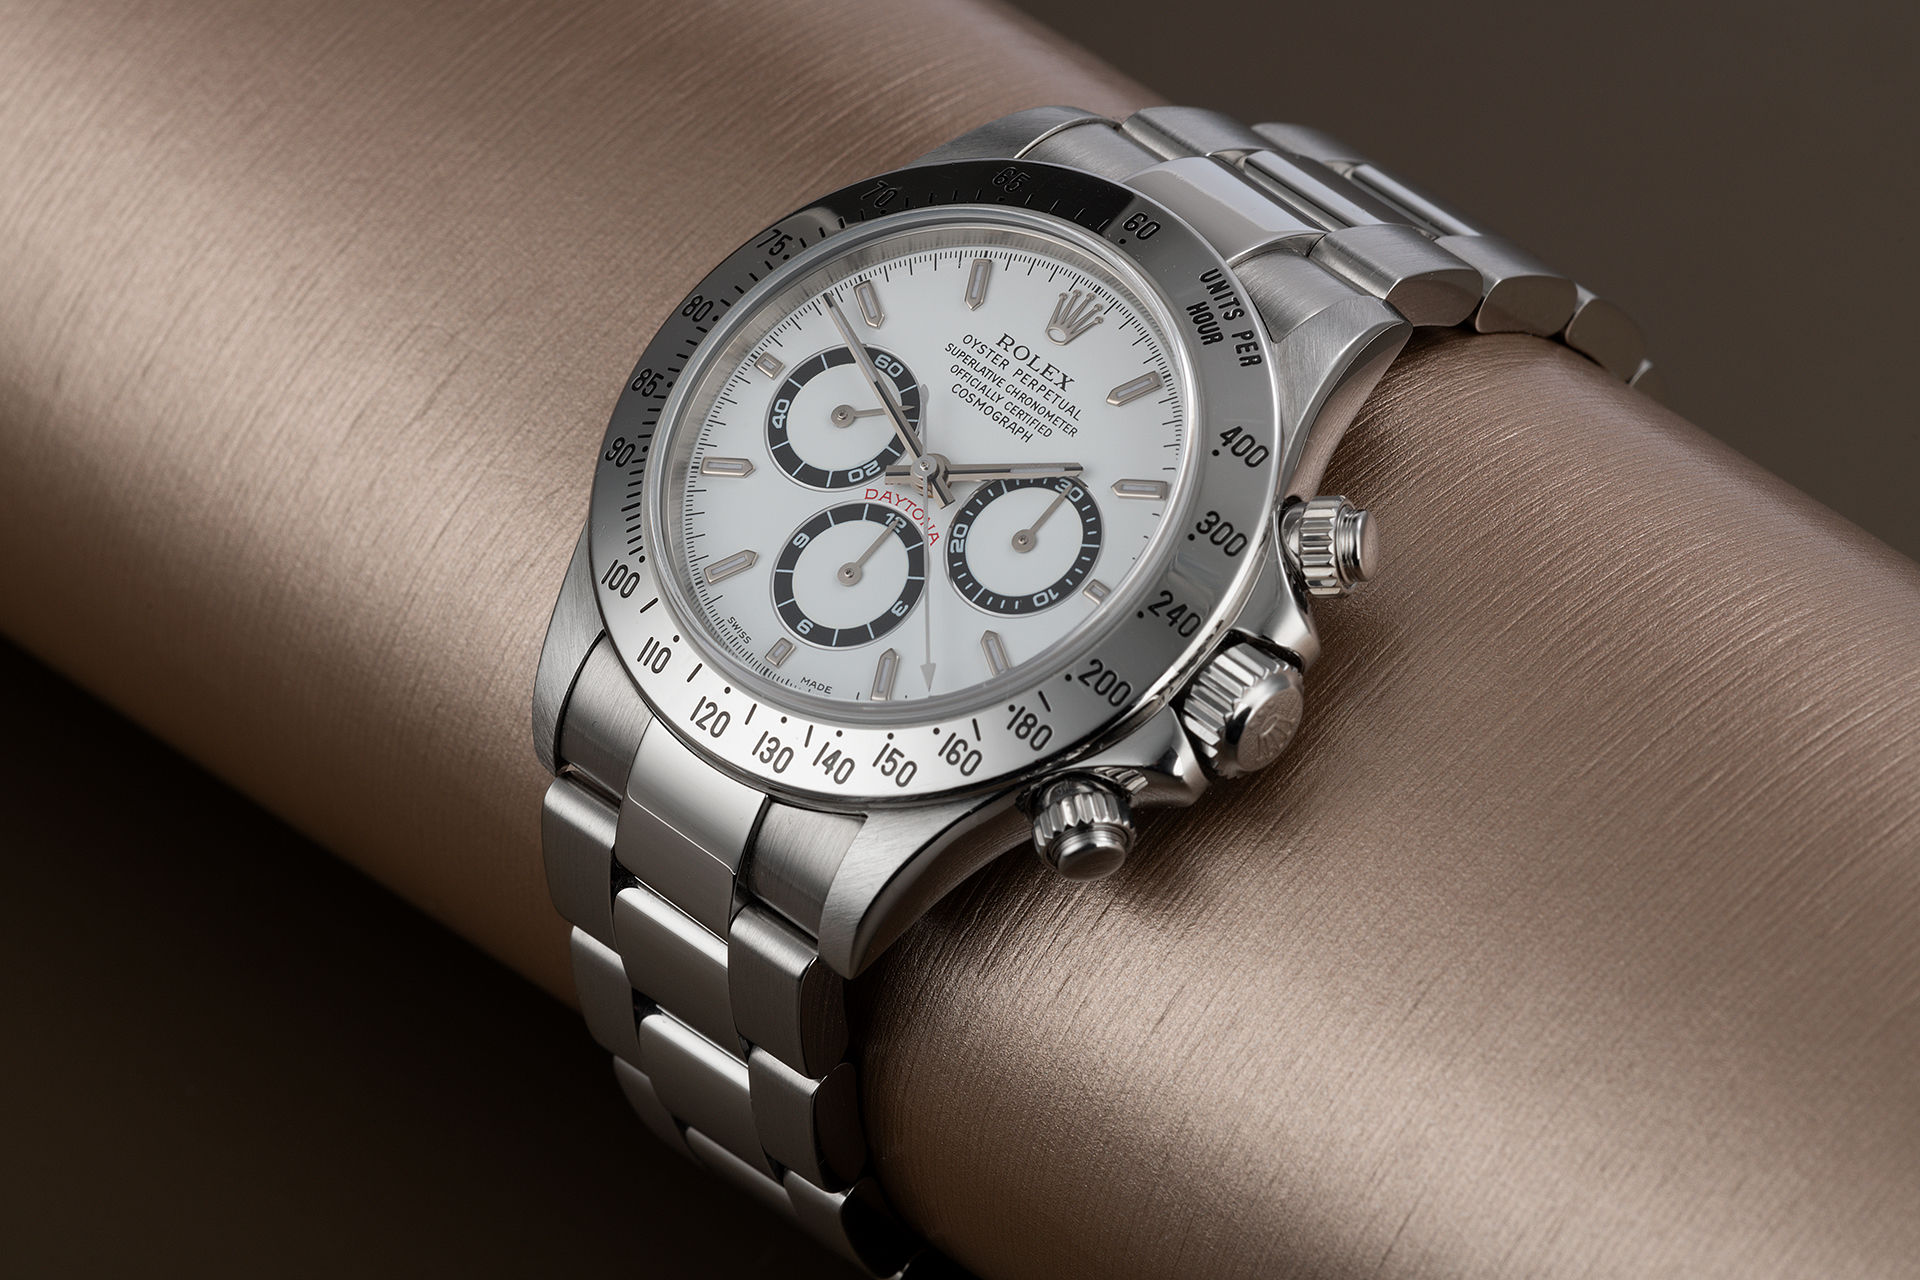 "New Old Stock" A serial | ref 16520 | Rolex Cosmograph Daytona